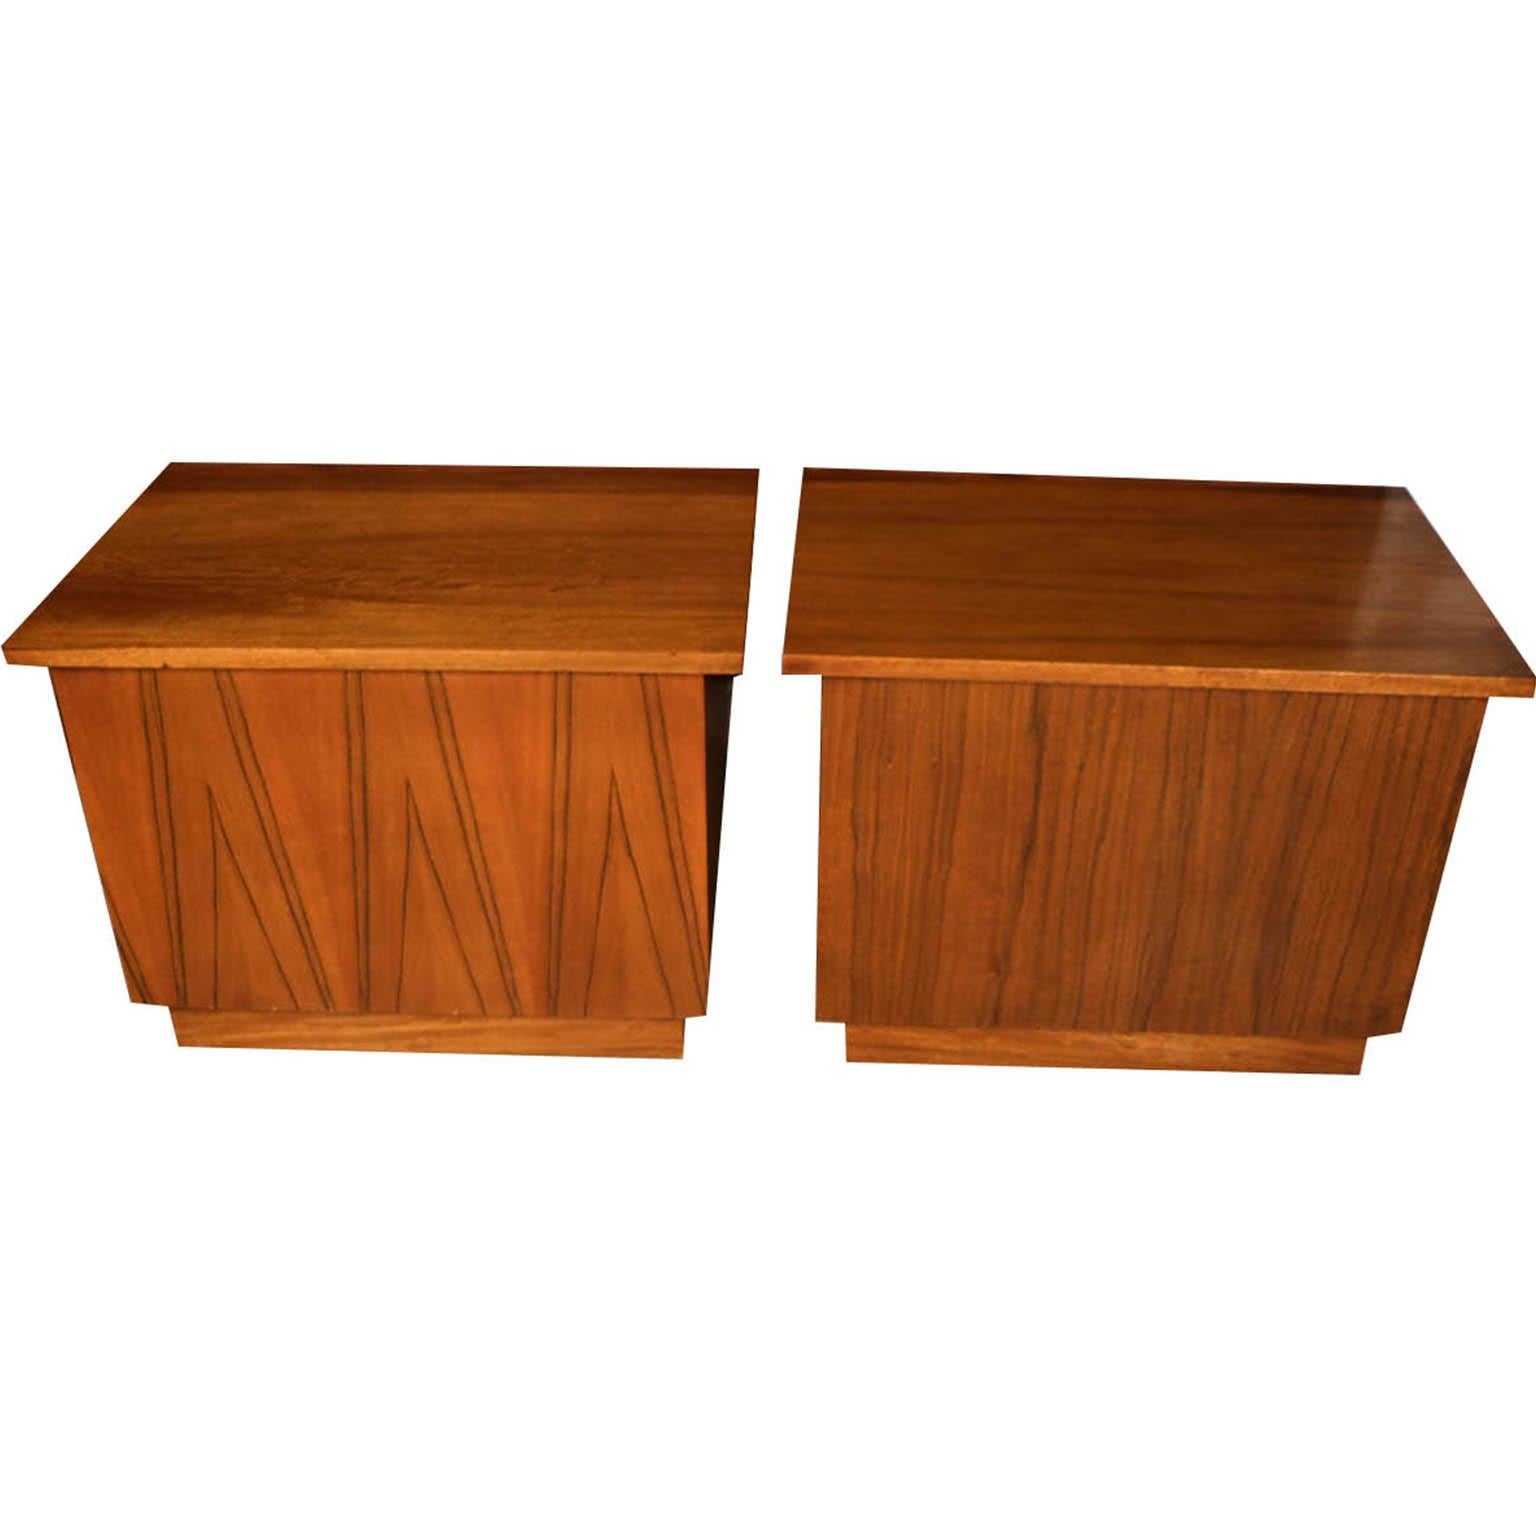 Midcentury Lane Furniture Nightstands Cabinets Tables 1